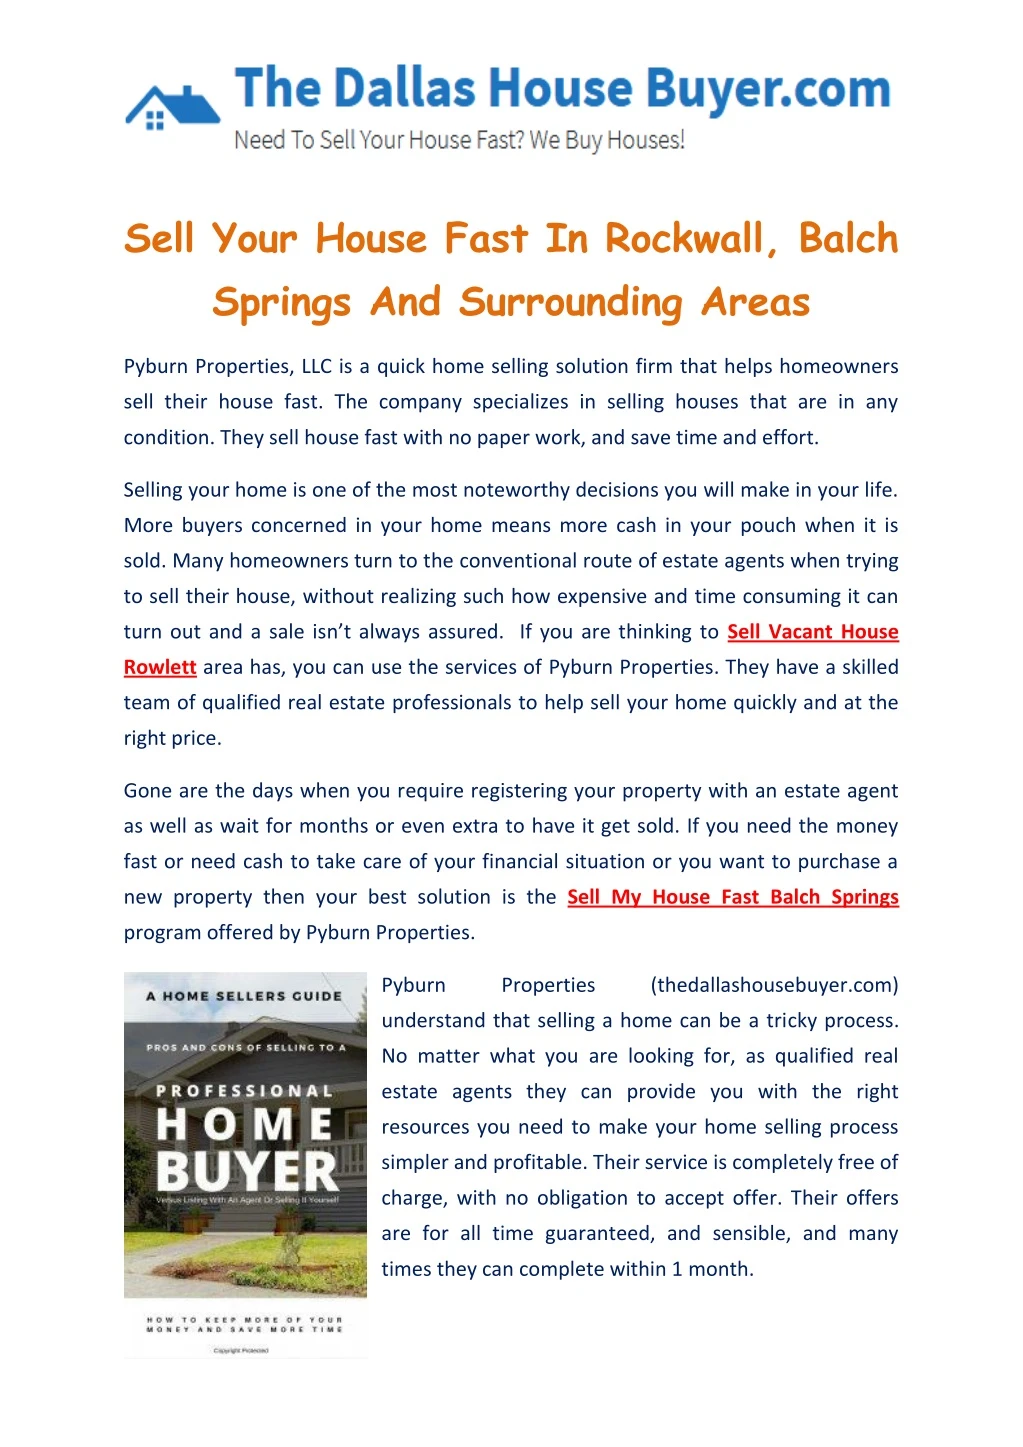 sell your house fast in rockwall balch springs